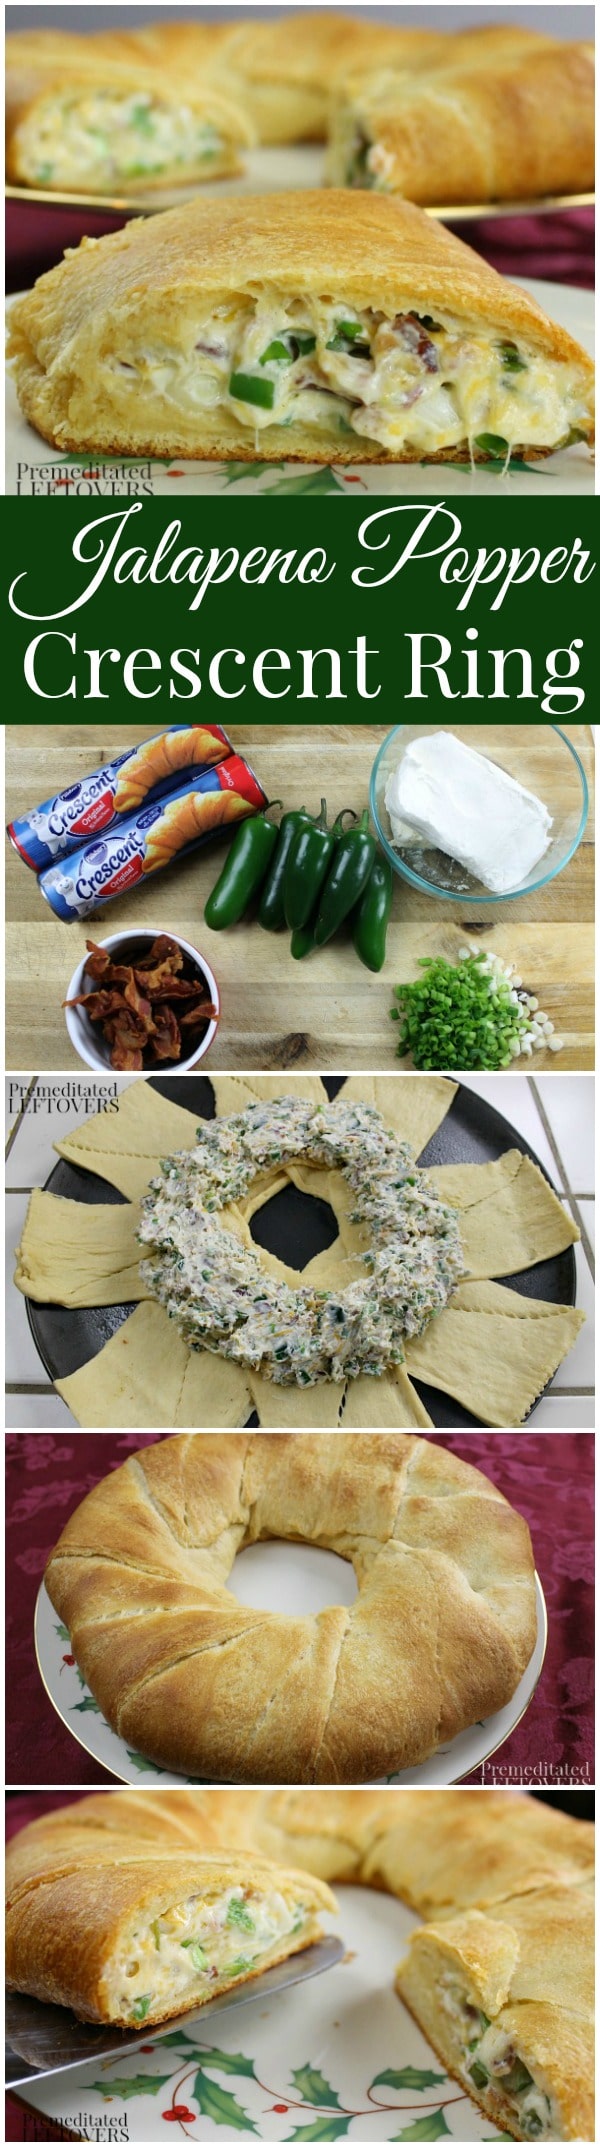 Jalapeno Popper Crescent Ring Recipe - An easy appetizer recipe